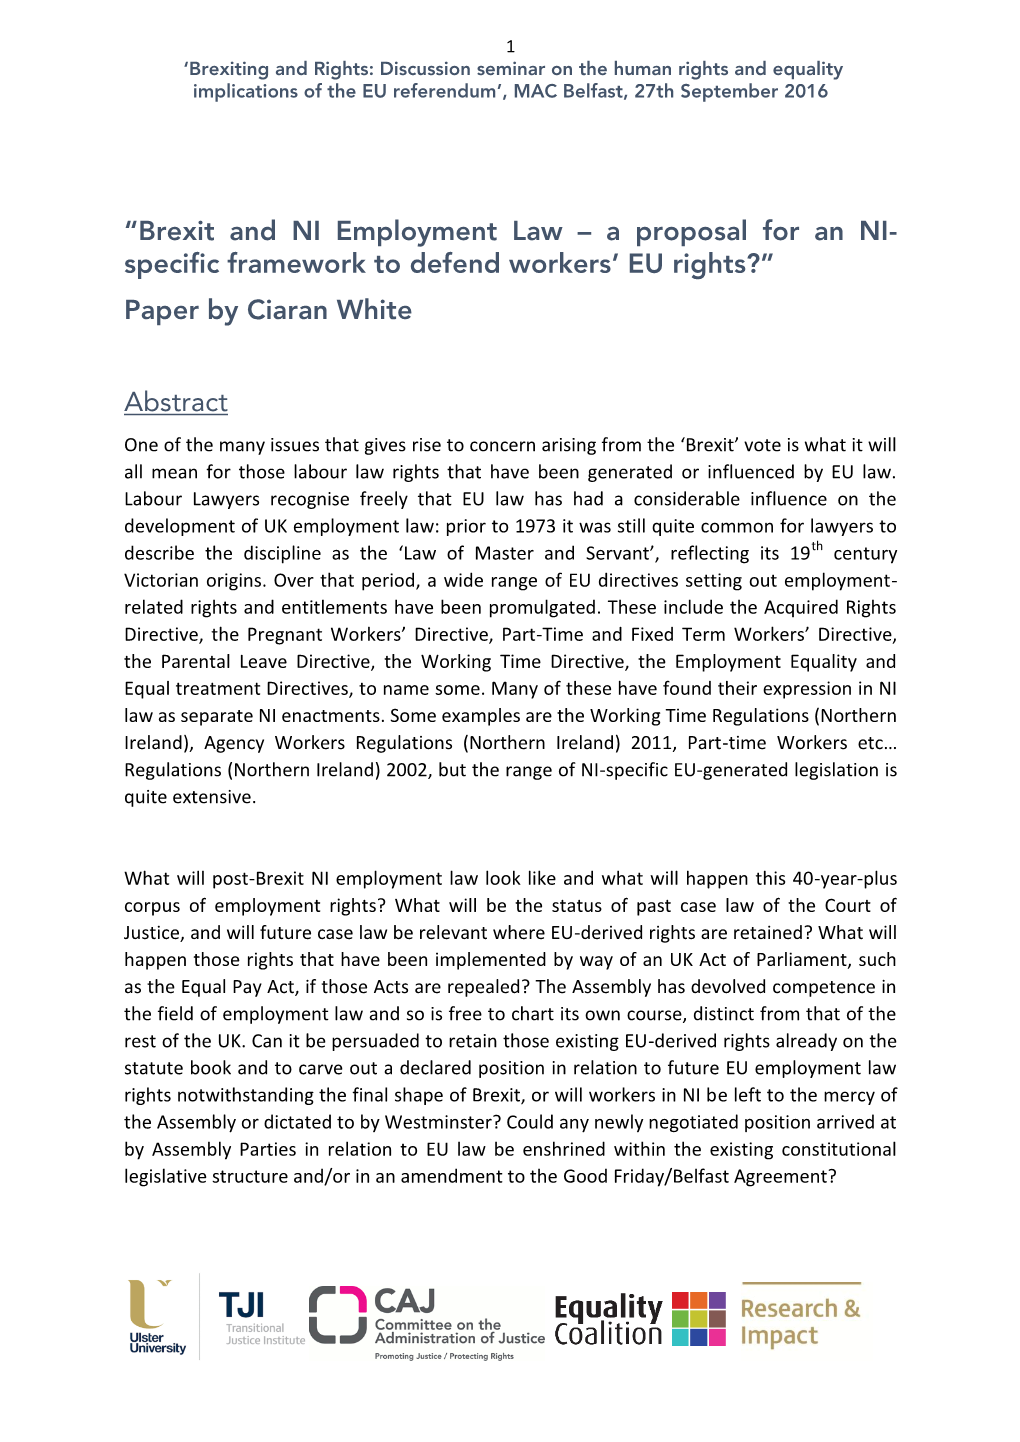 “Brexit and NI Employment Law – a Proposal for an NI- Specific Framework to Defend Workers’ EU Rights?” Paper by Ciaran White